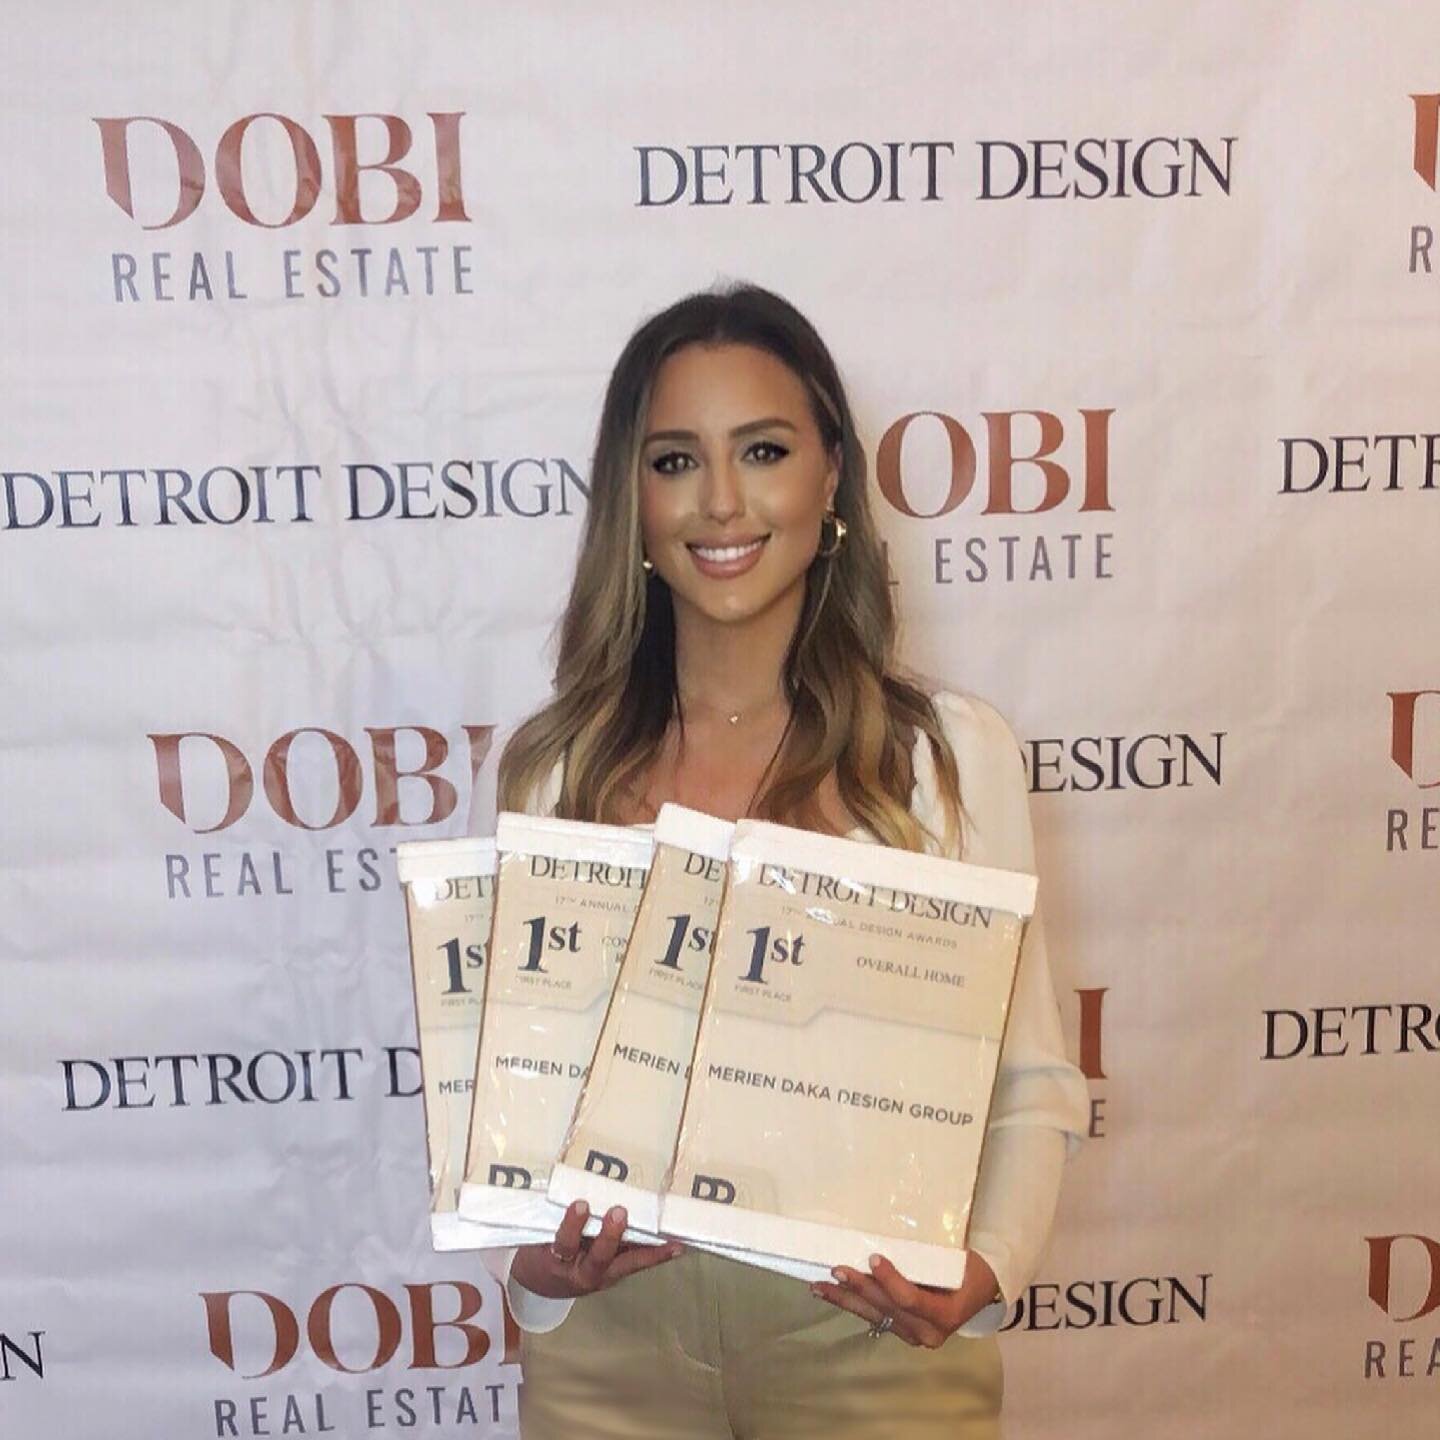 Great night for MDDG at the Detroit Design Awards! Taking away four 1st place awards including the prestigious &ldquo;Michigan&rsquo;s Best Overall Home&rdquo;! We are so thankful for all the support and recognition from the Detroit design community!